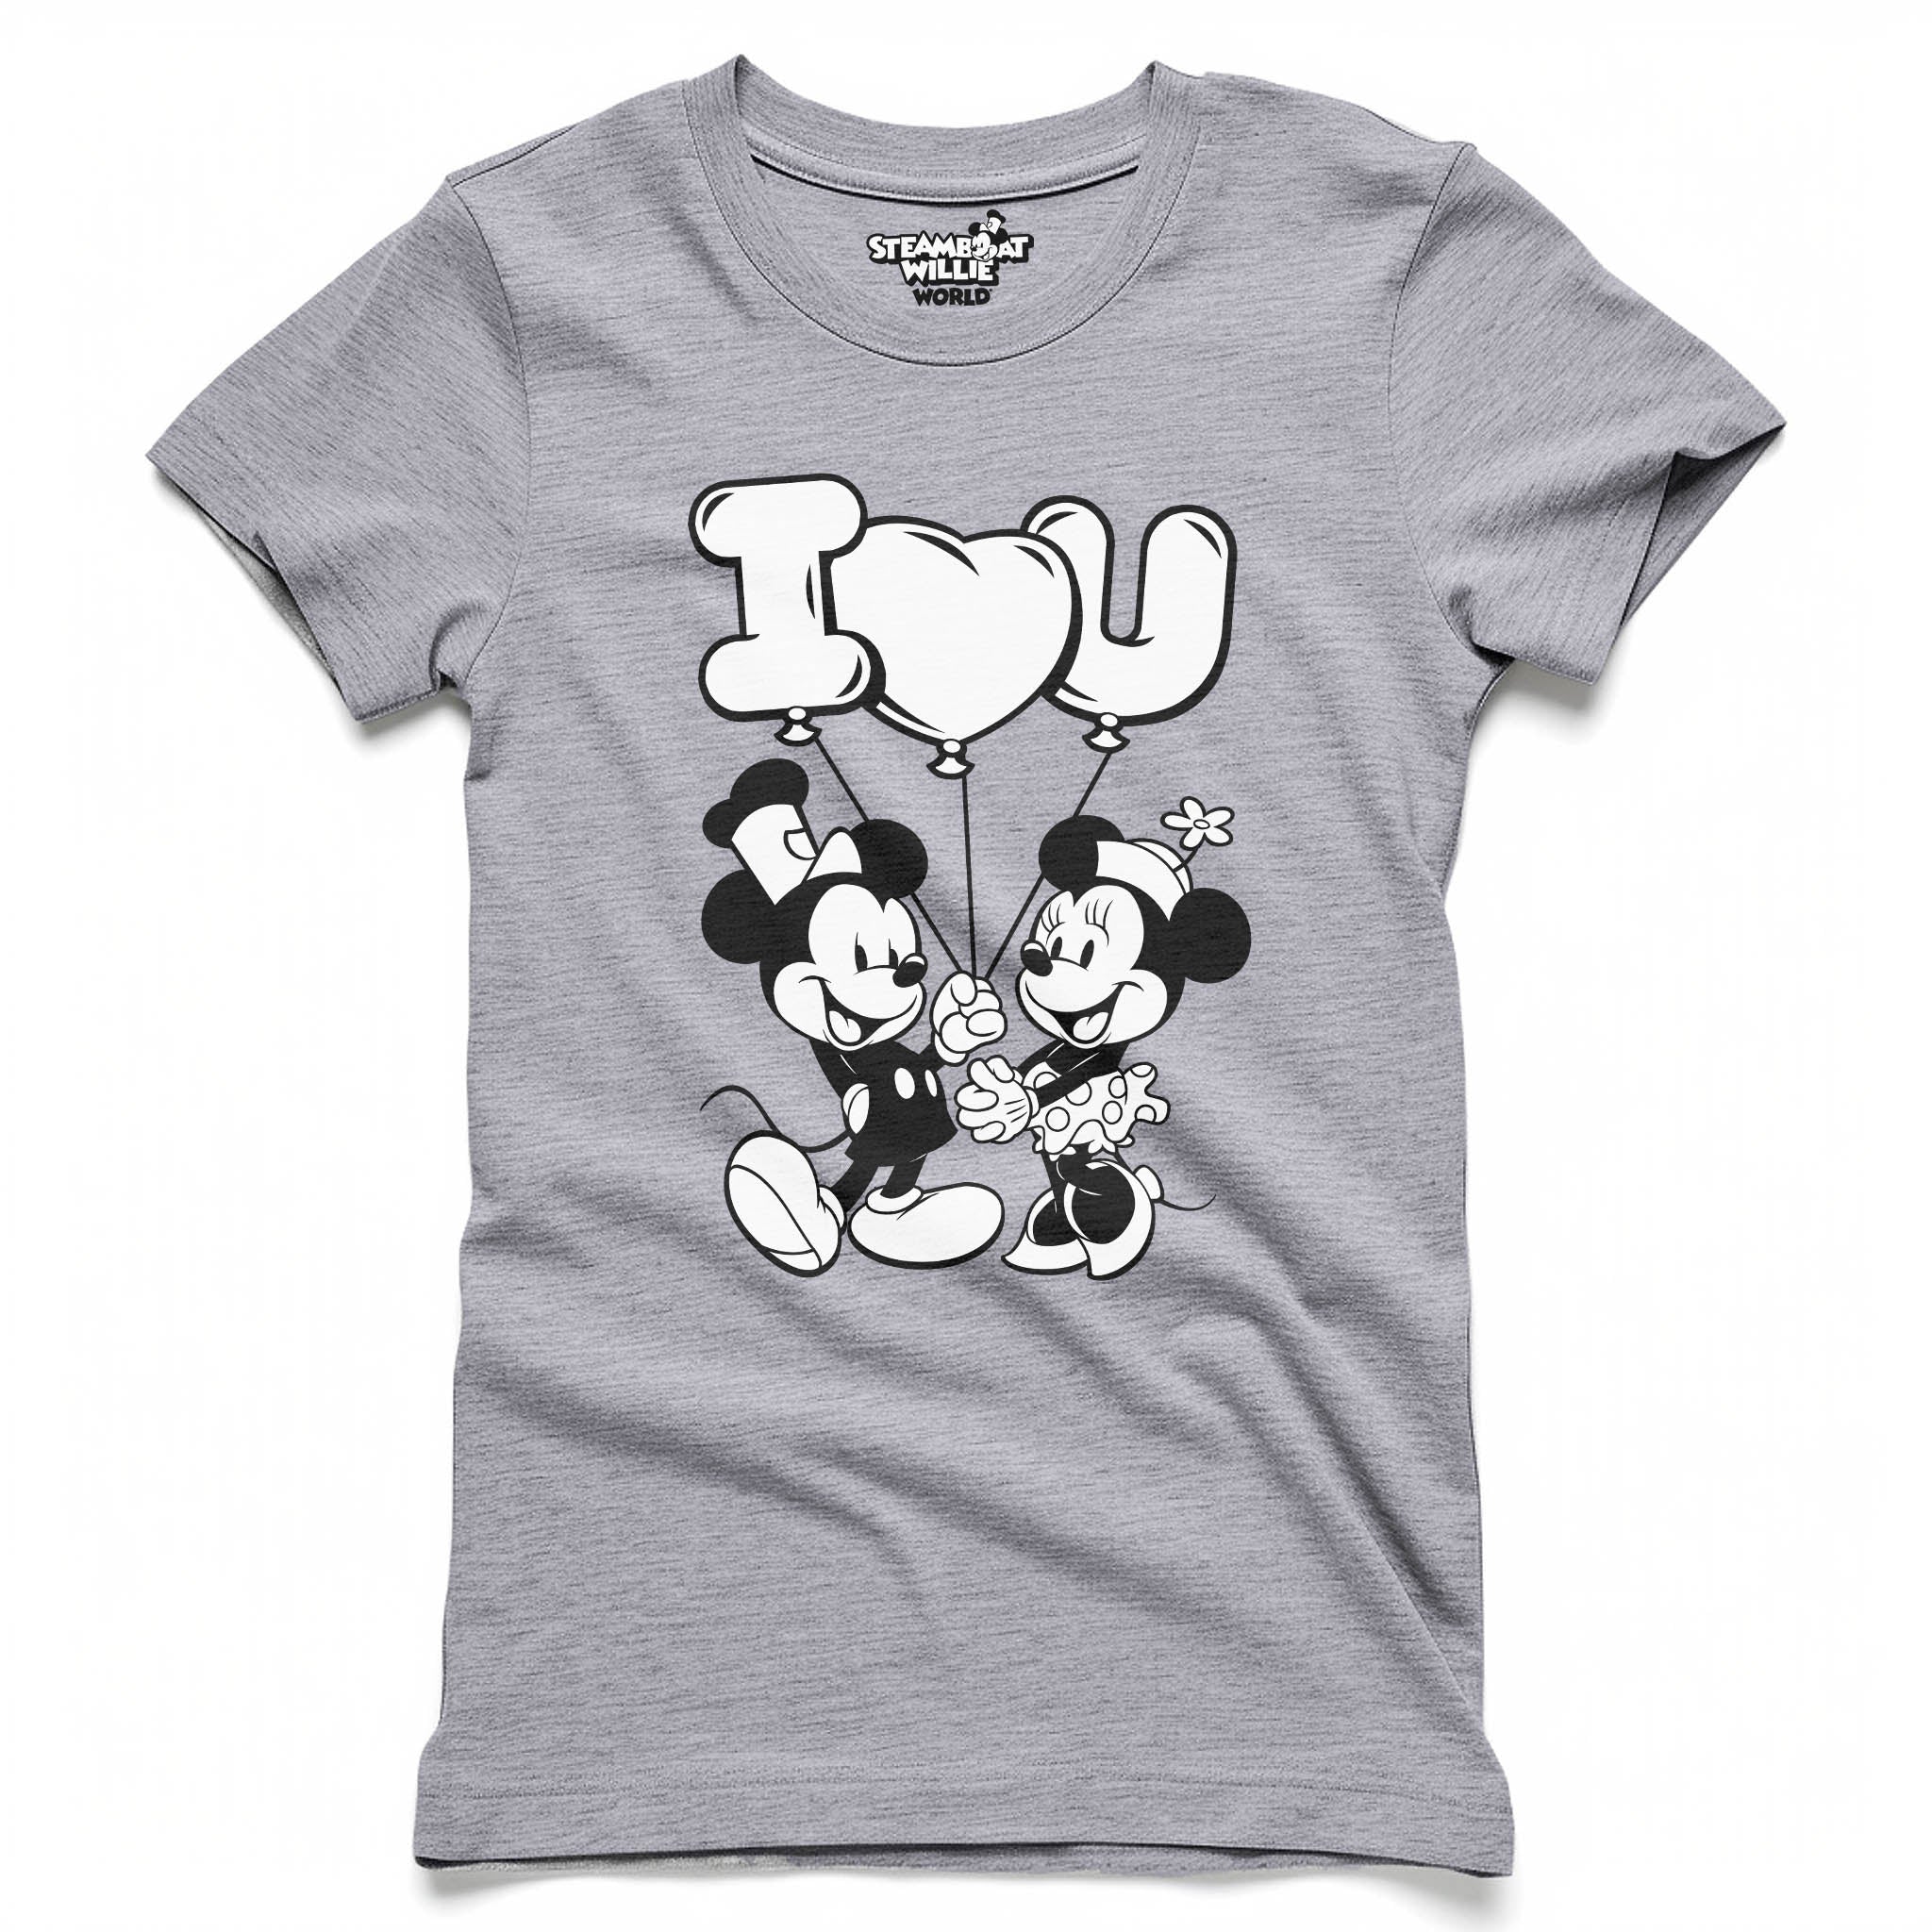 I Heart You! Women's Fitted Tee - Steamboat Willie World